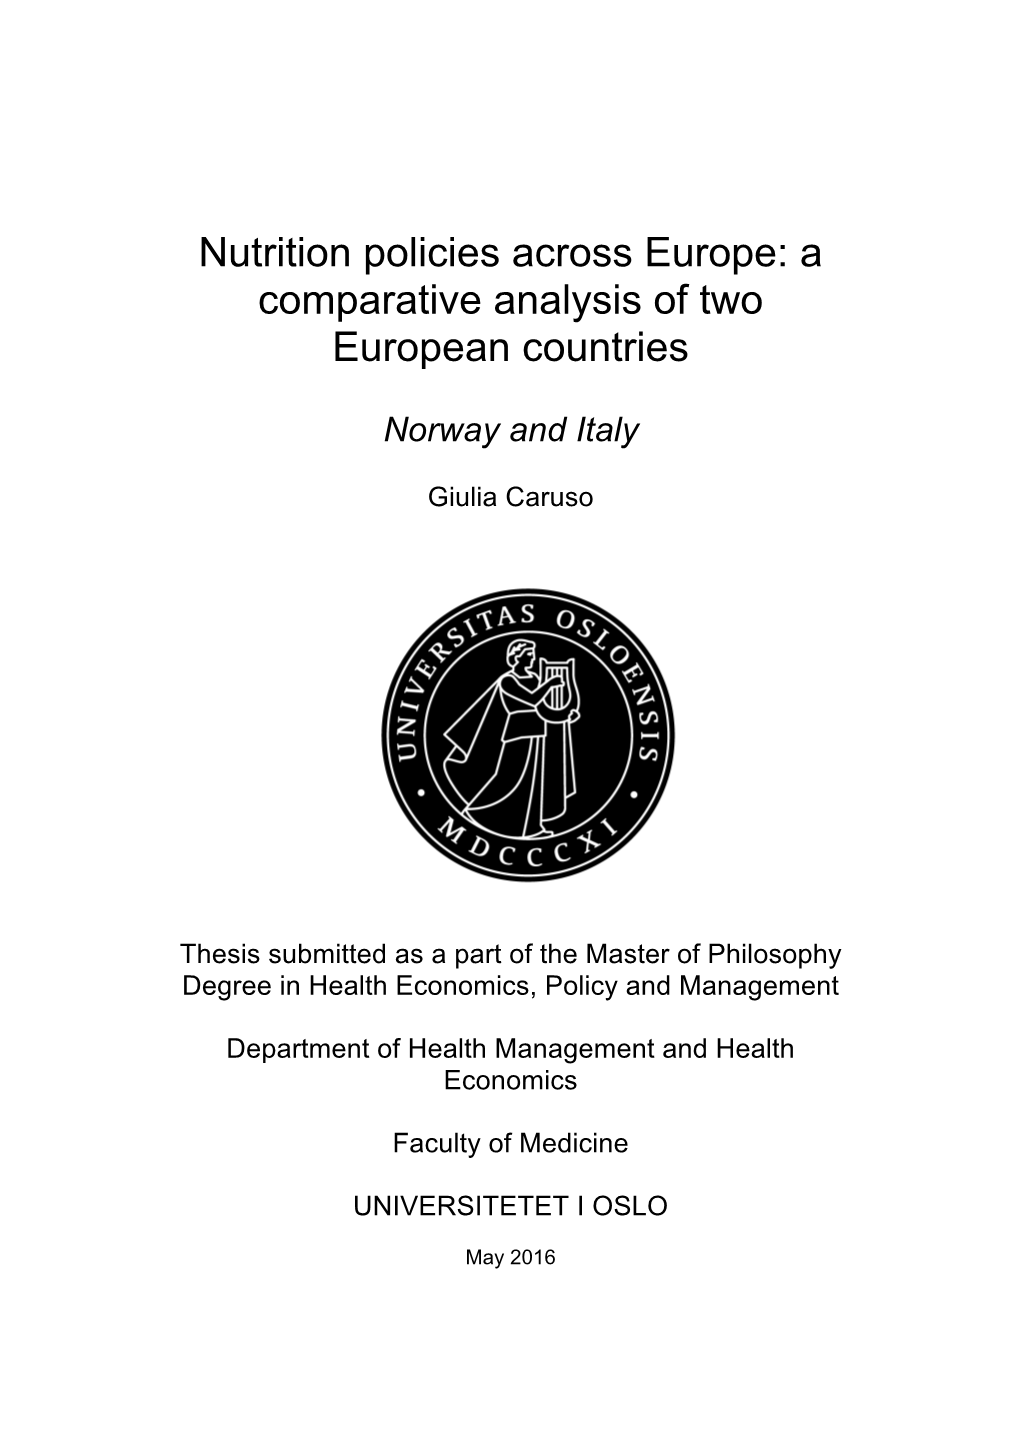 Nutrition Policies Across Europe: a Comparative Analysis of Two European Countries